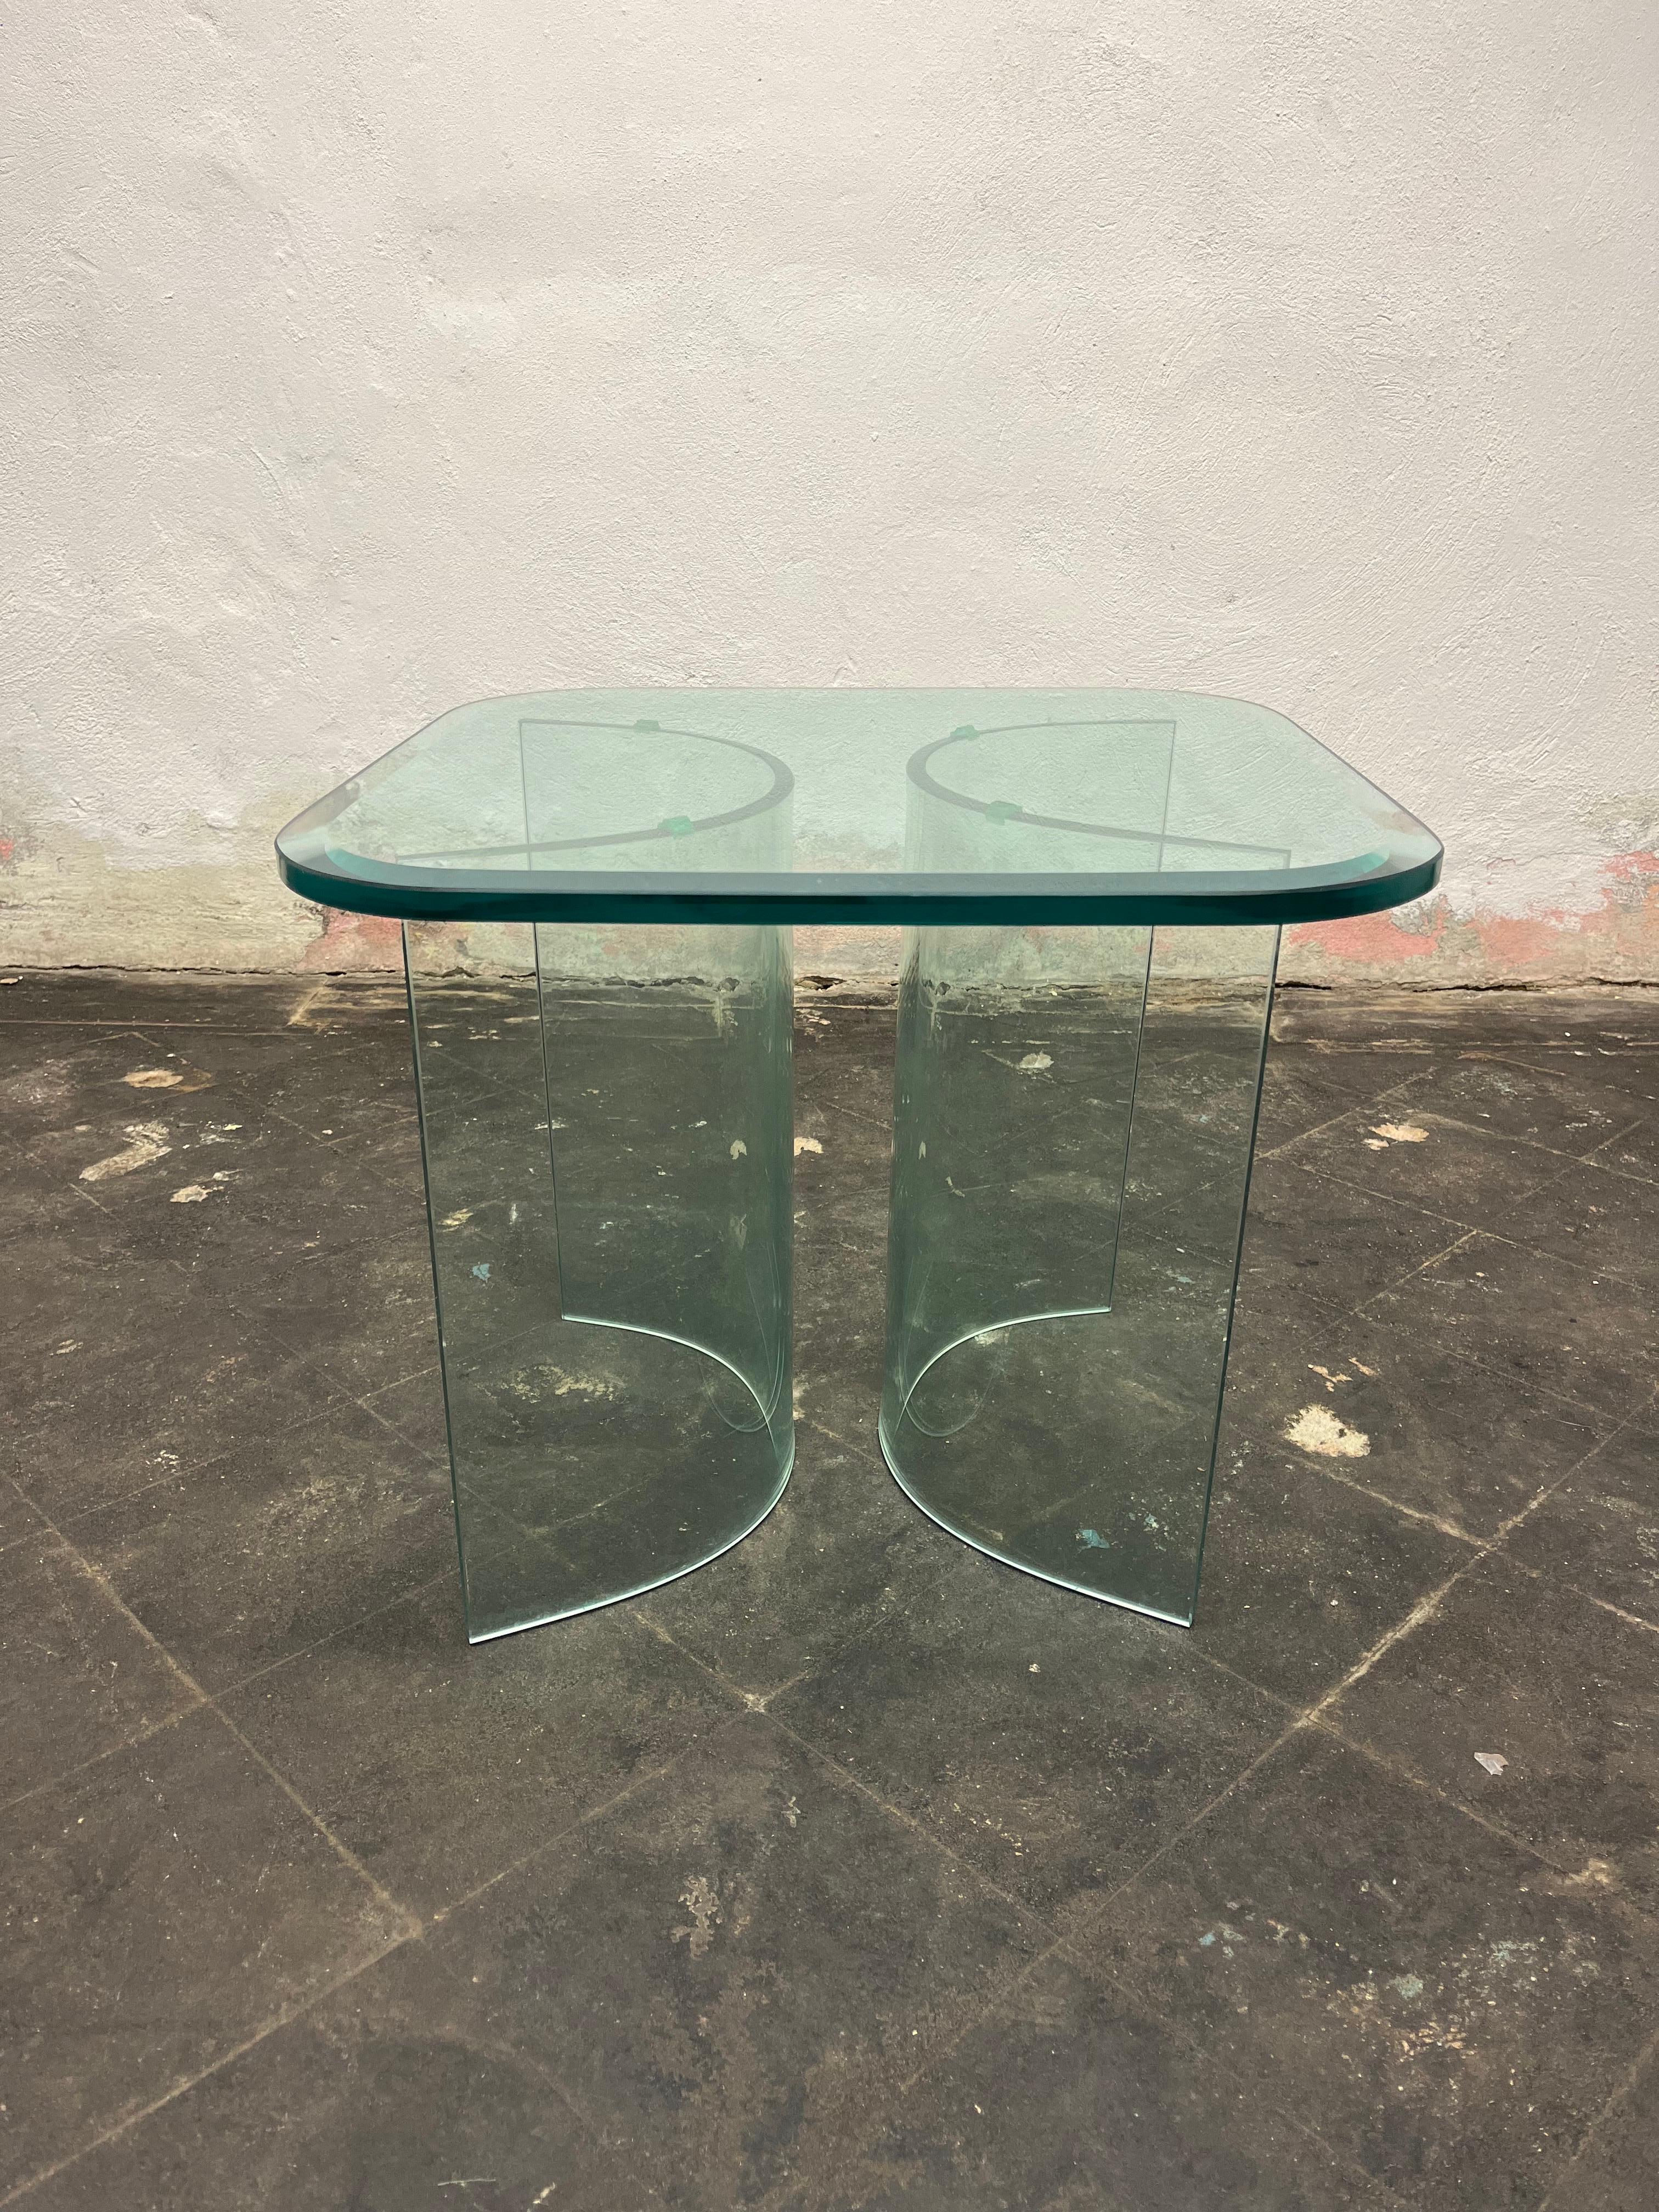 Solid Plate Glass Top Glass Base Table In Good Condition For Sale In W Allenhurst, NJ